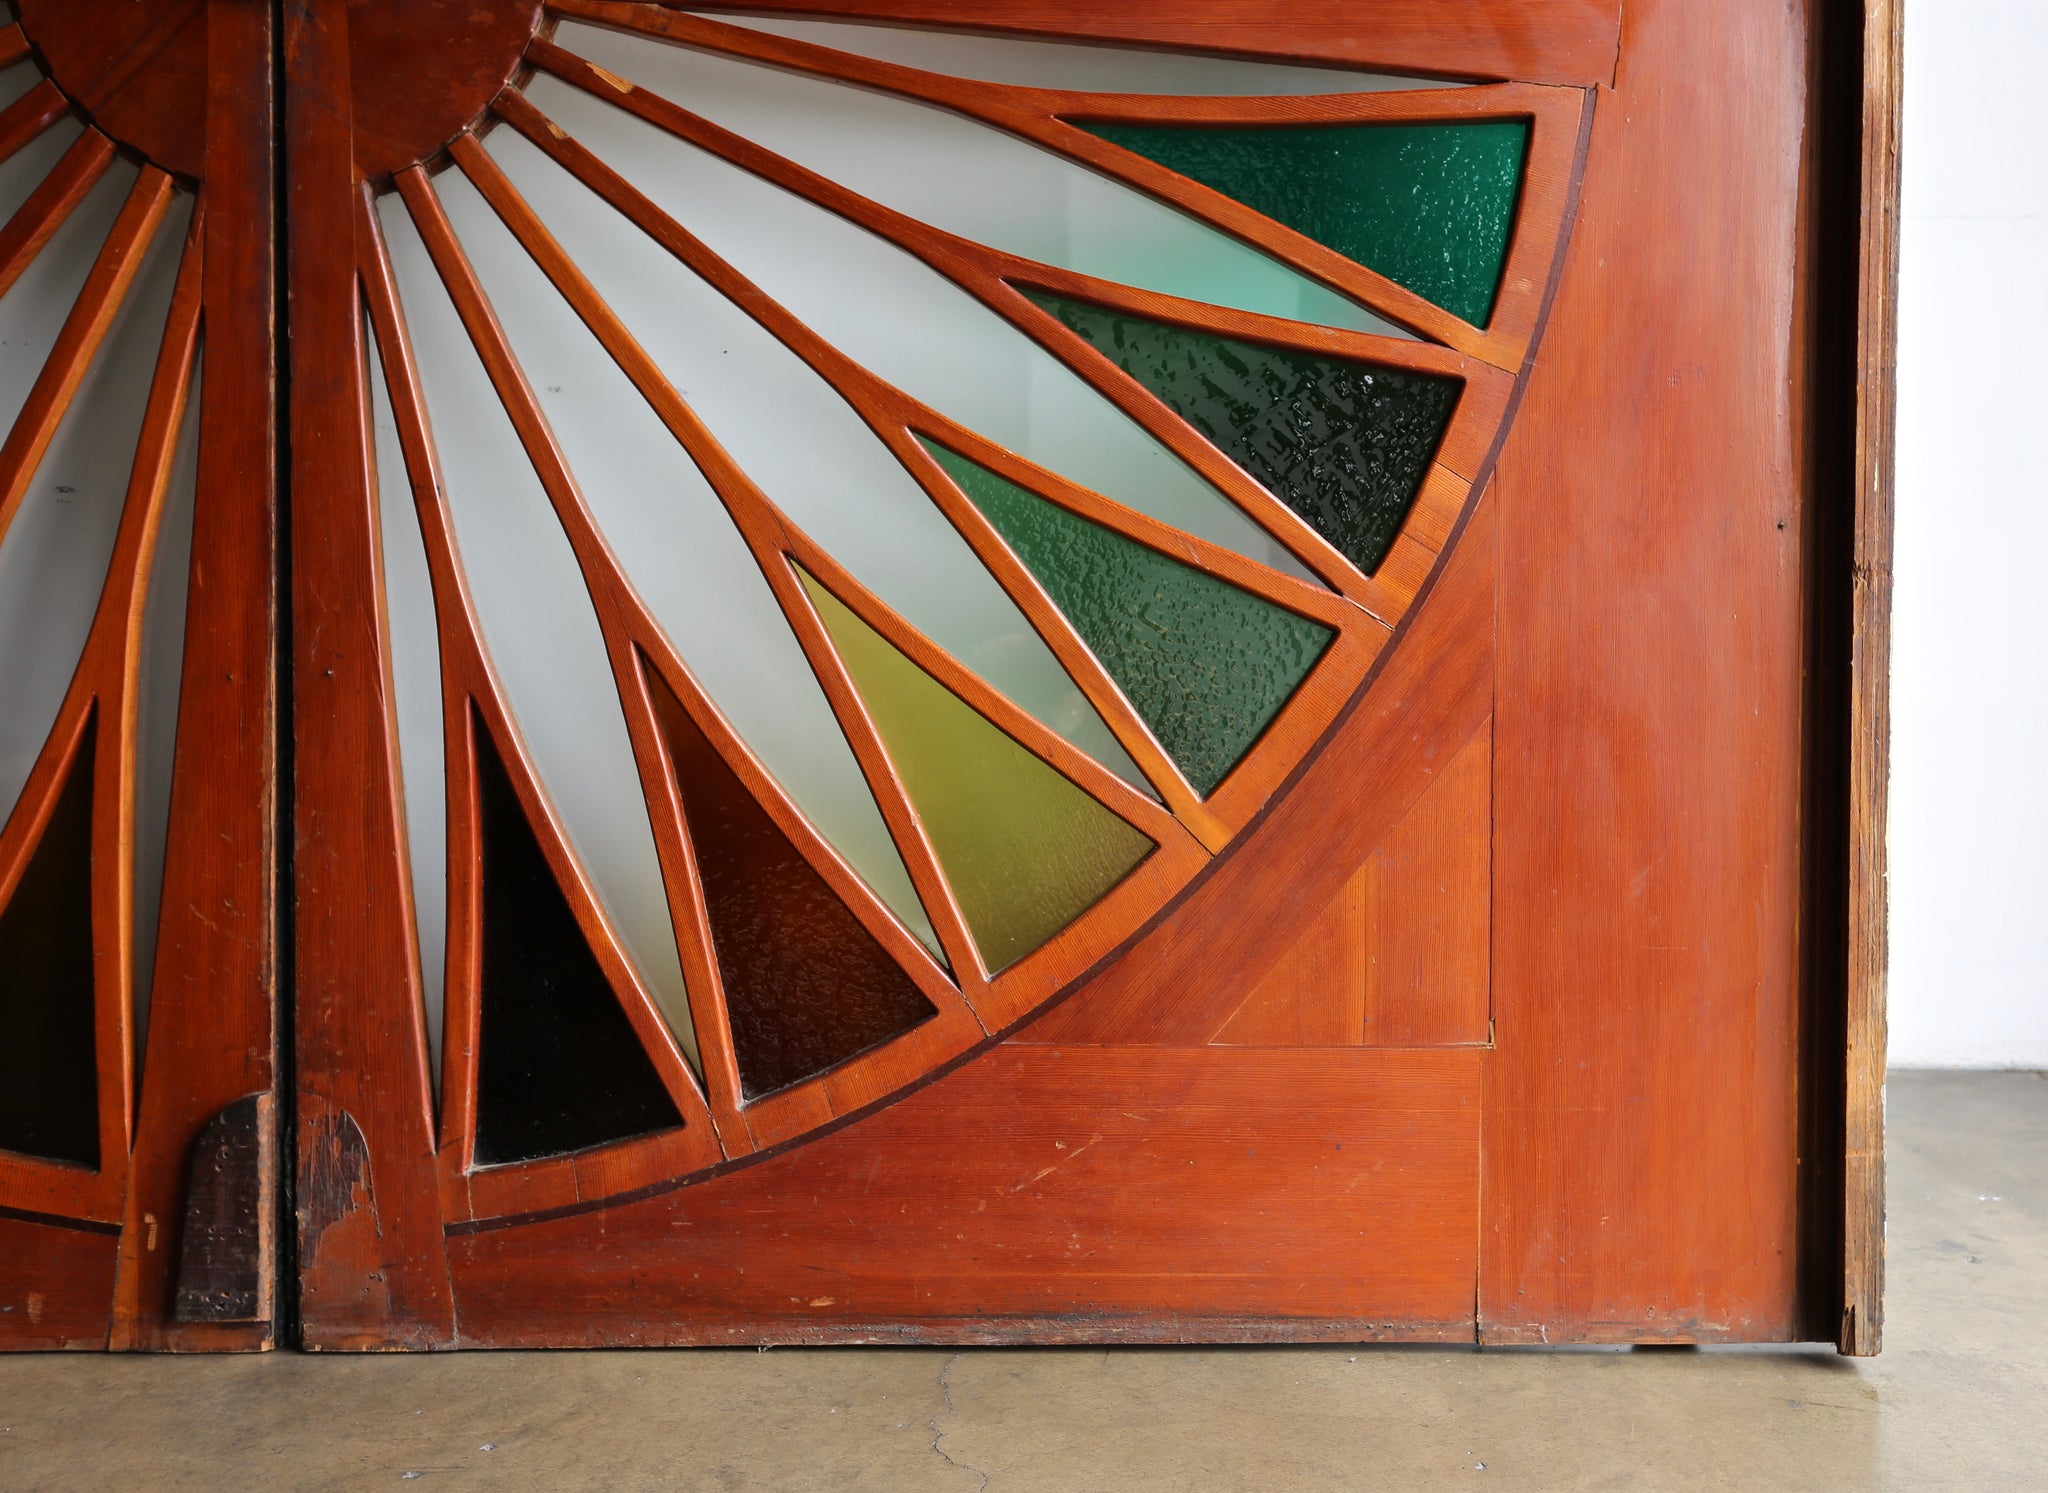 = SOLD = Monumental Stained Glass Sliding Doors, circa 1970